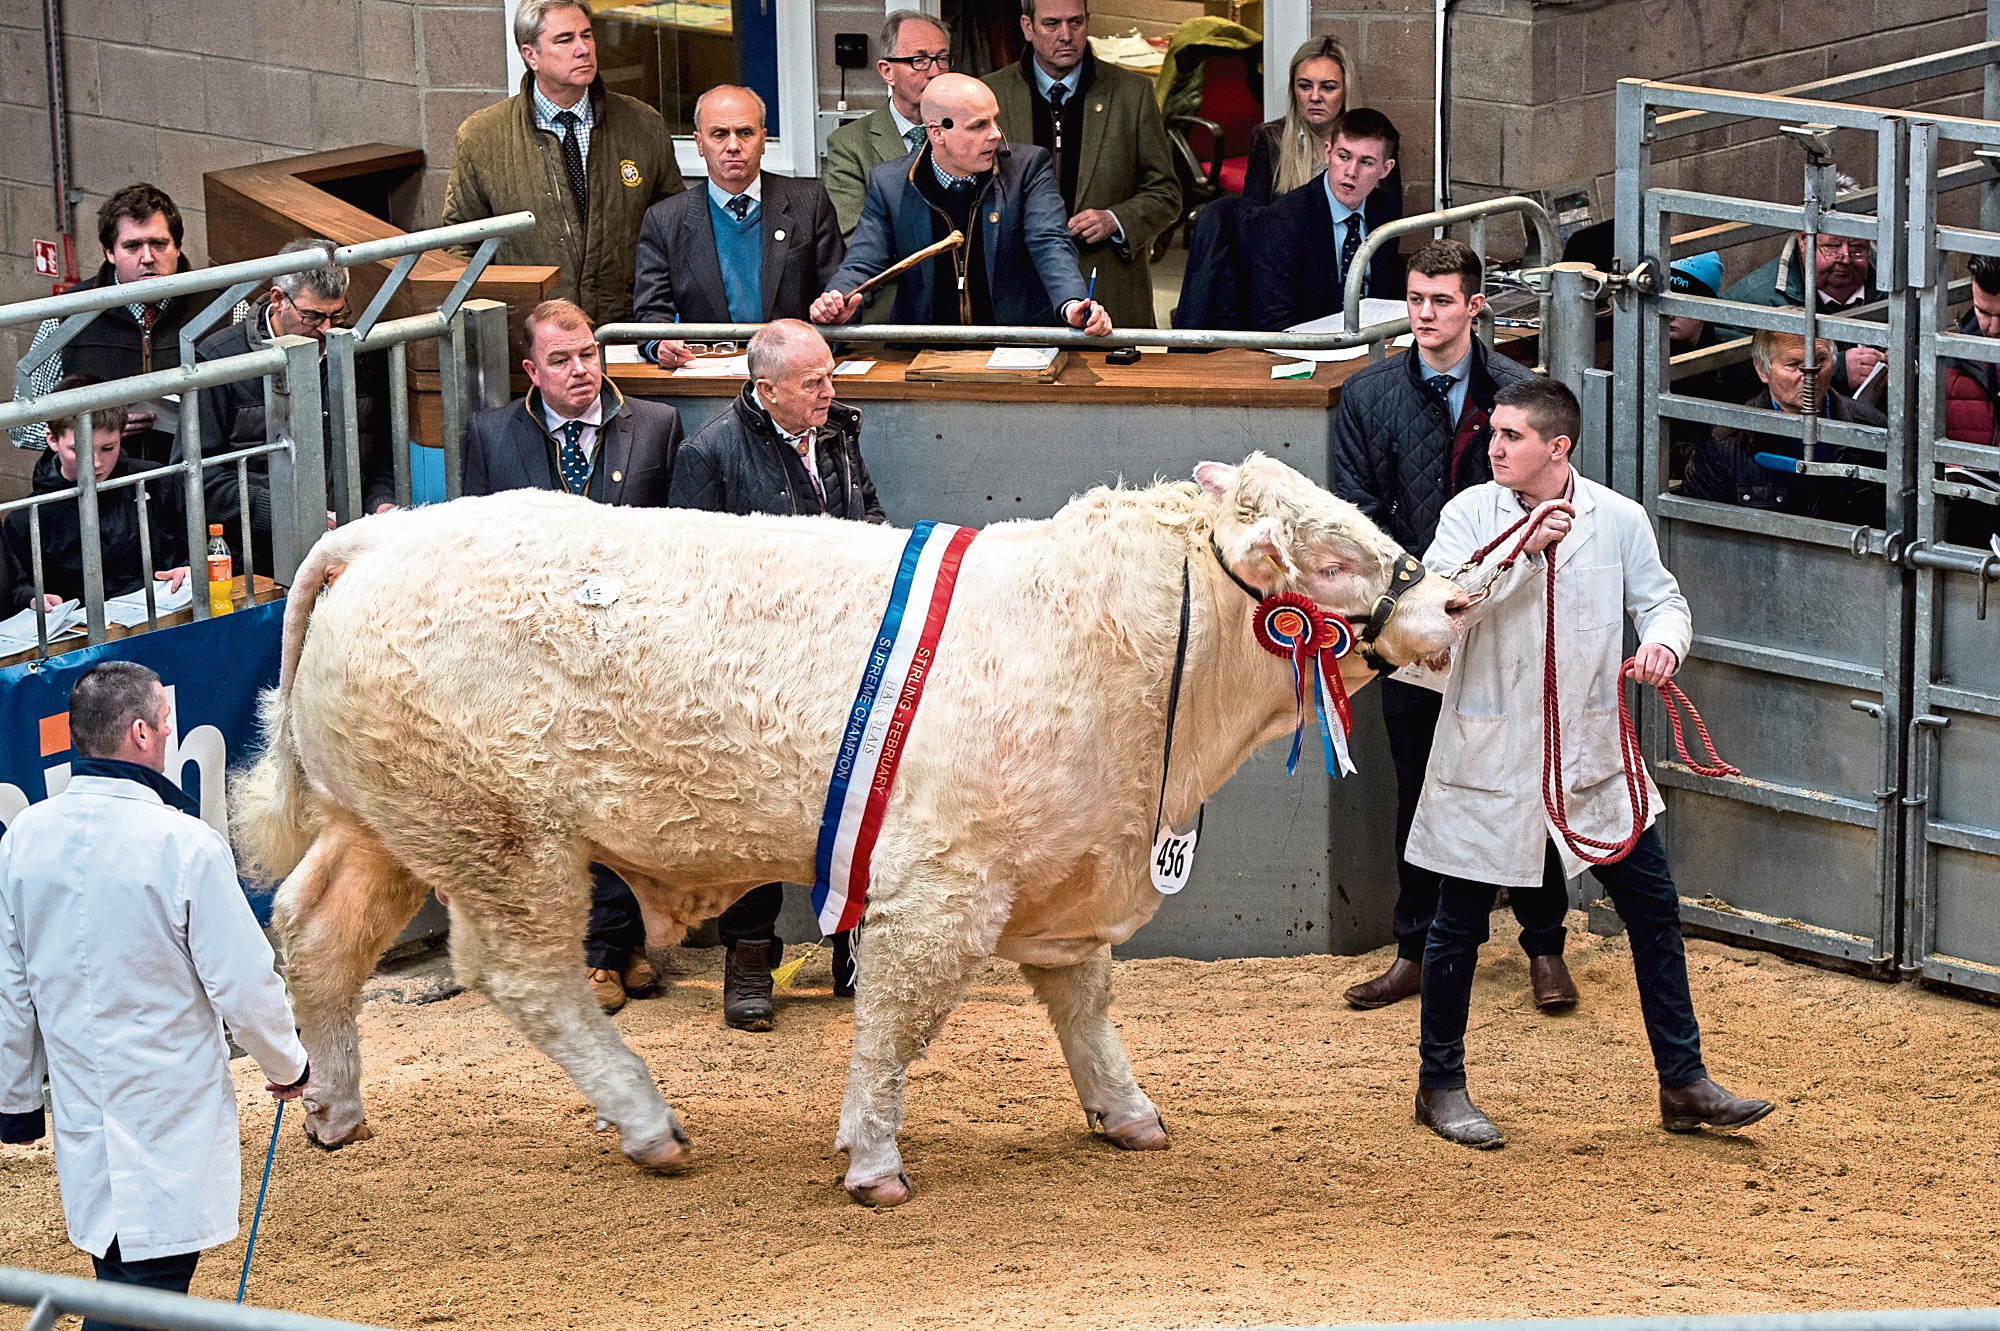 The May Stirling Bull Sales has been cancelled and UA will directly market bulls instead.